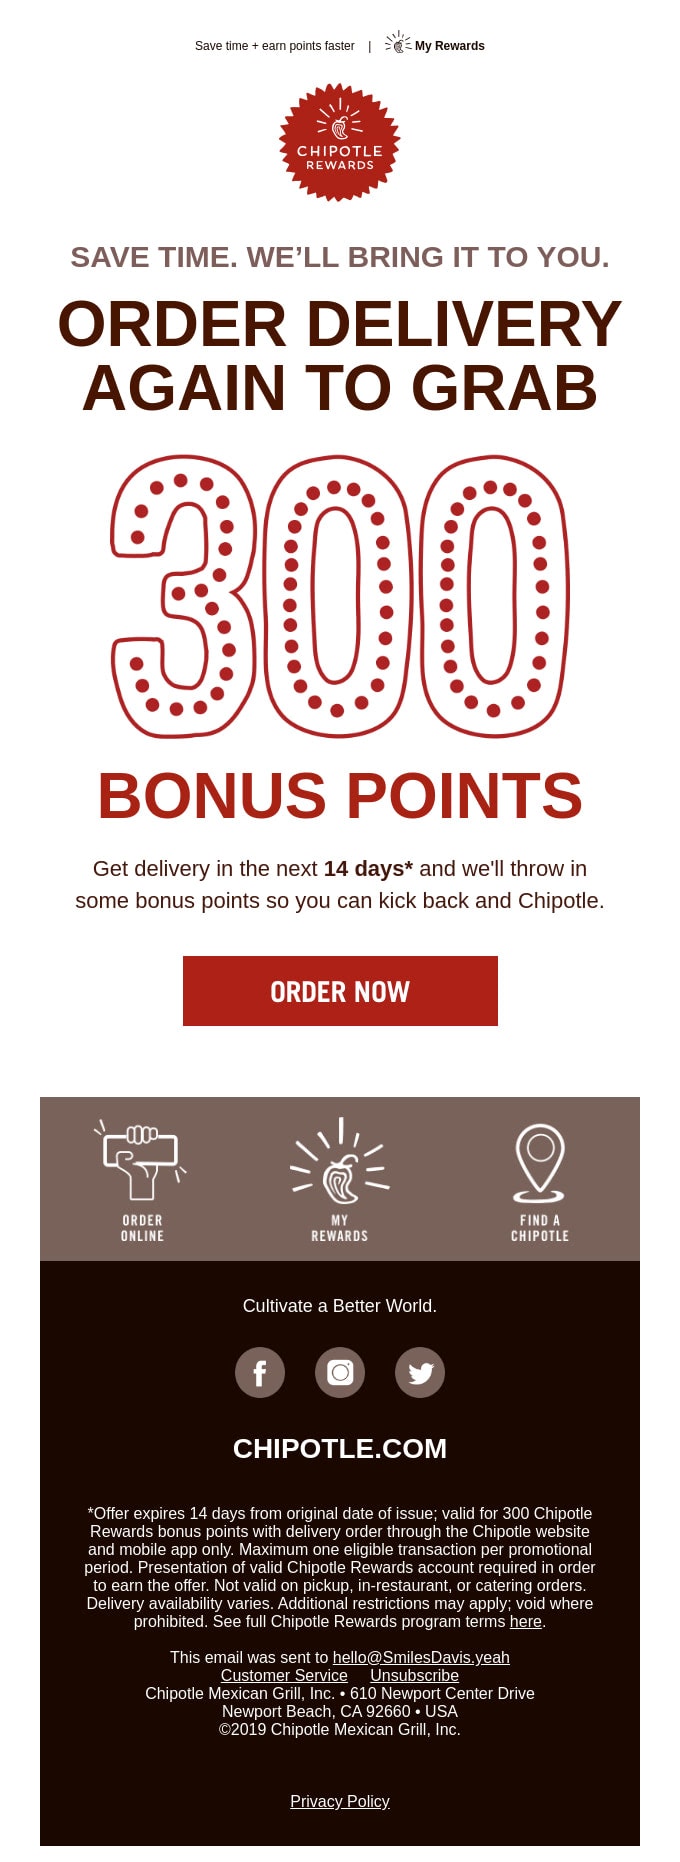 Email Design from Chipotle